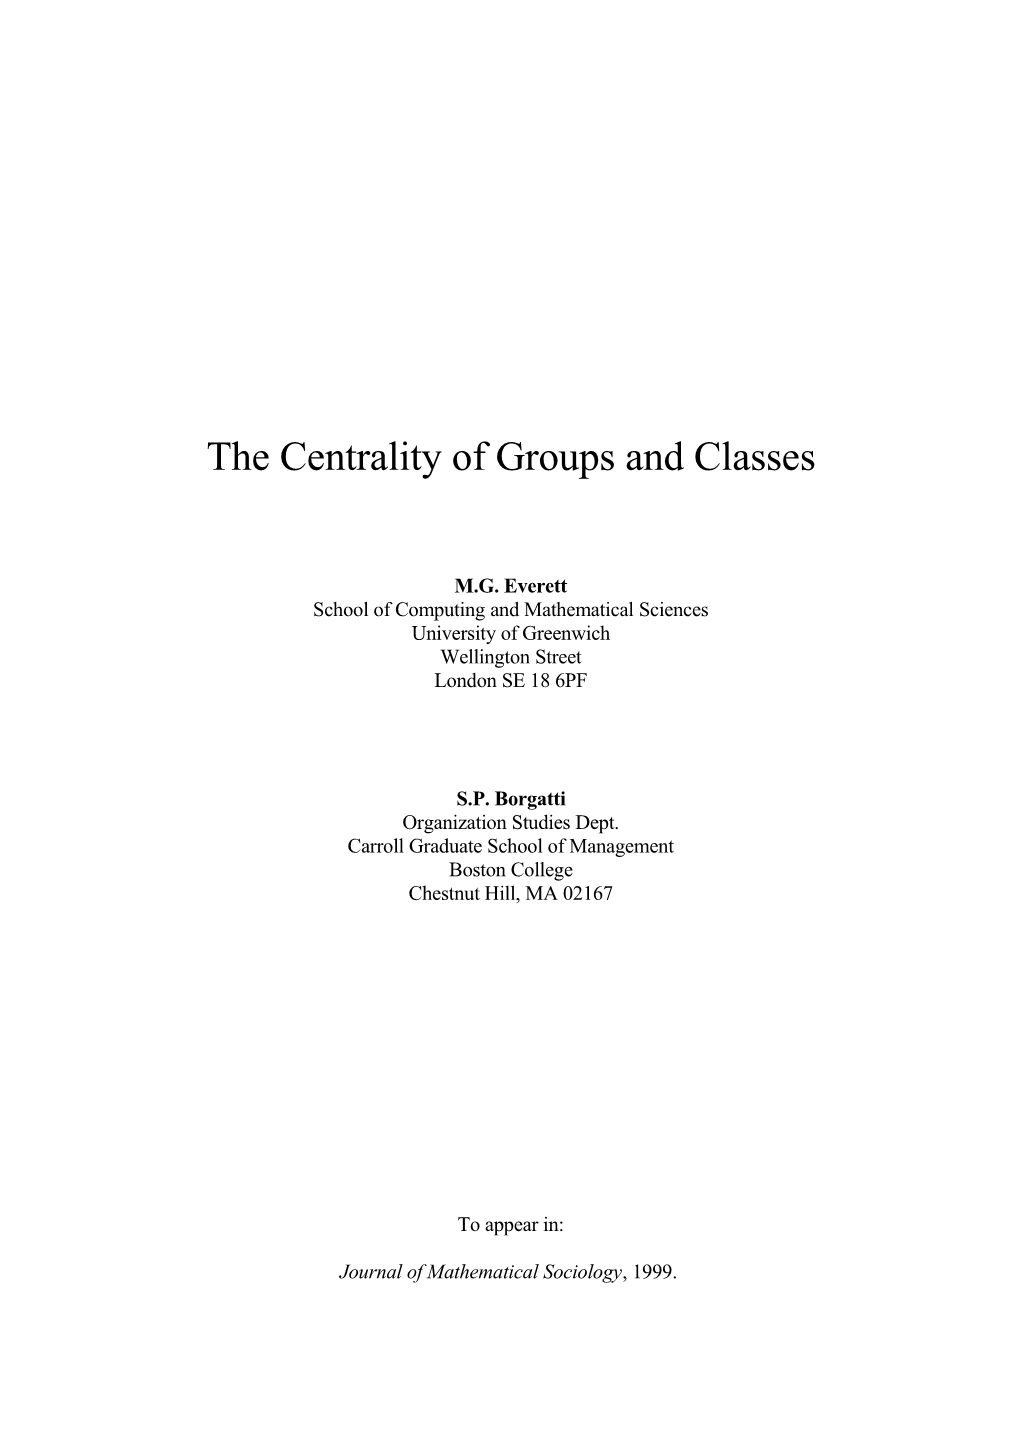 The Centrality of Groups and Classes